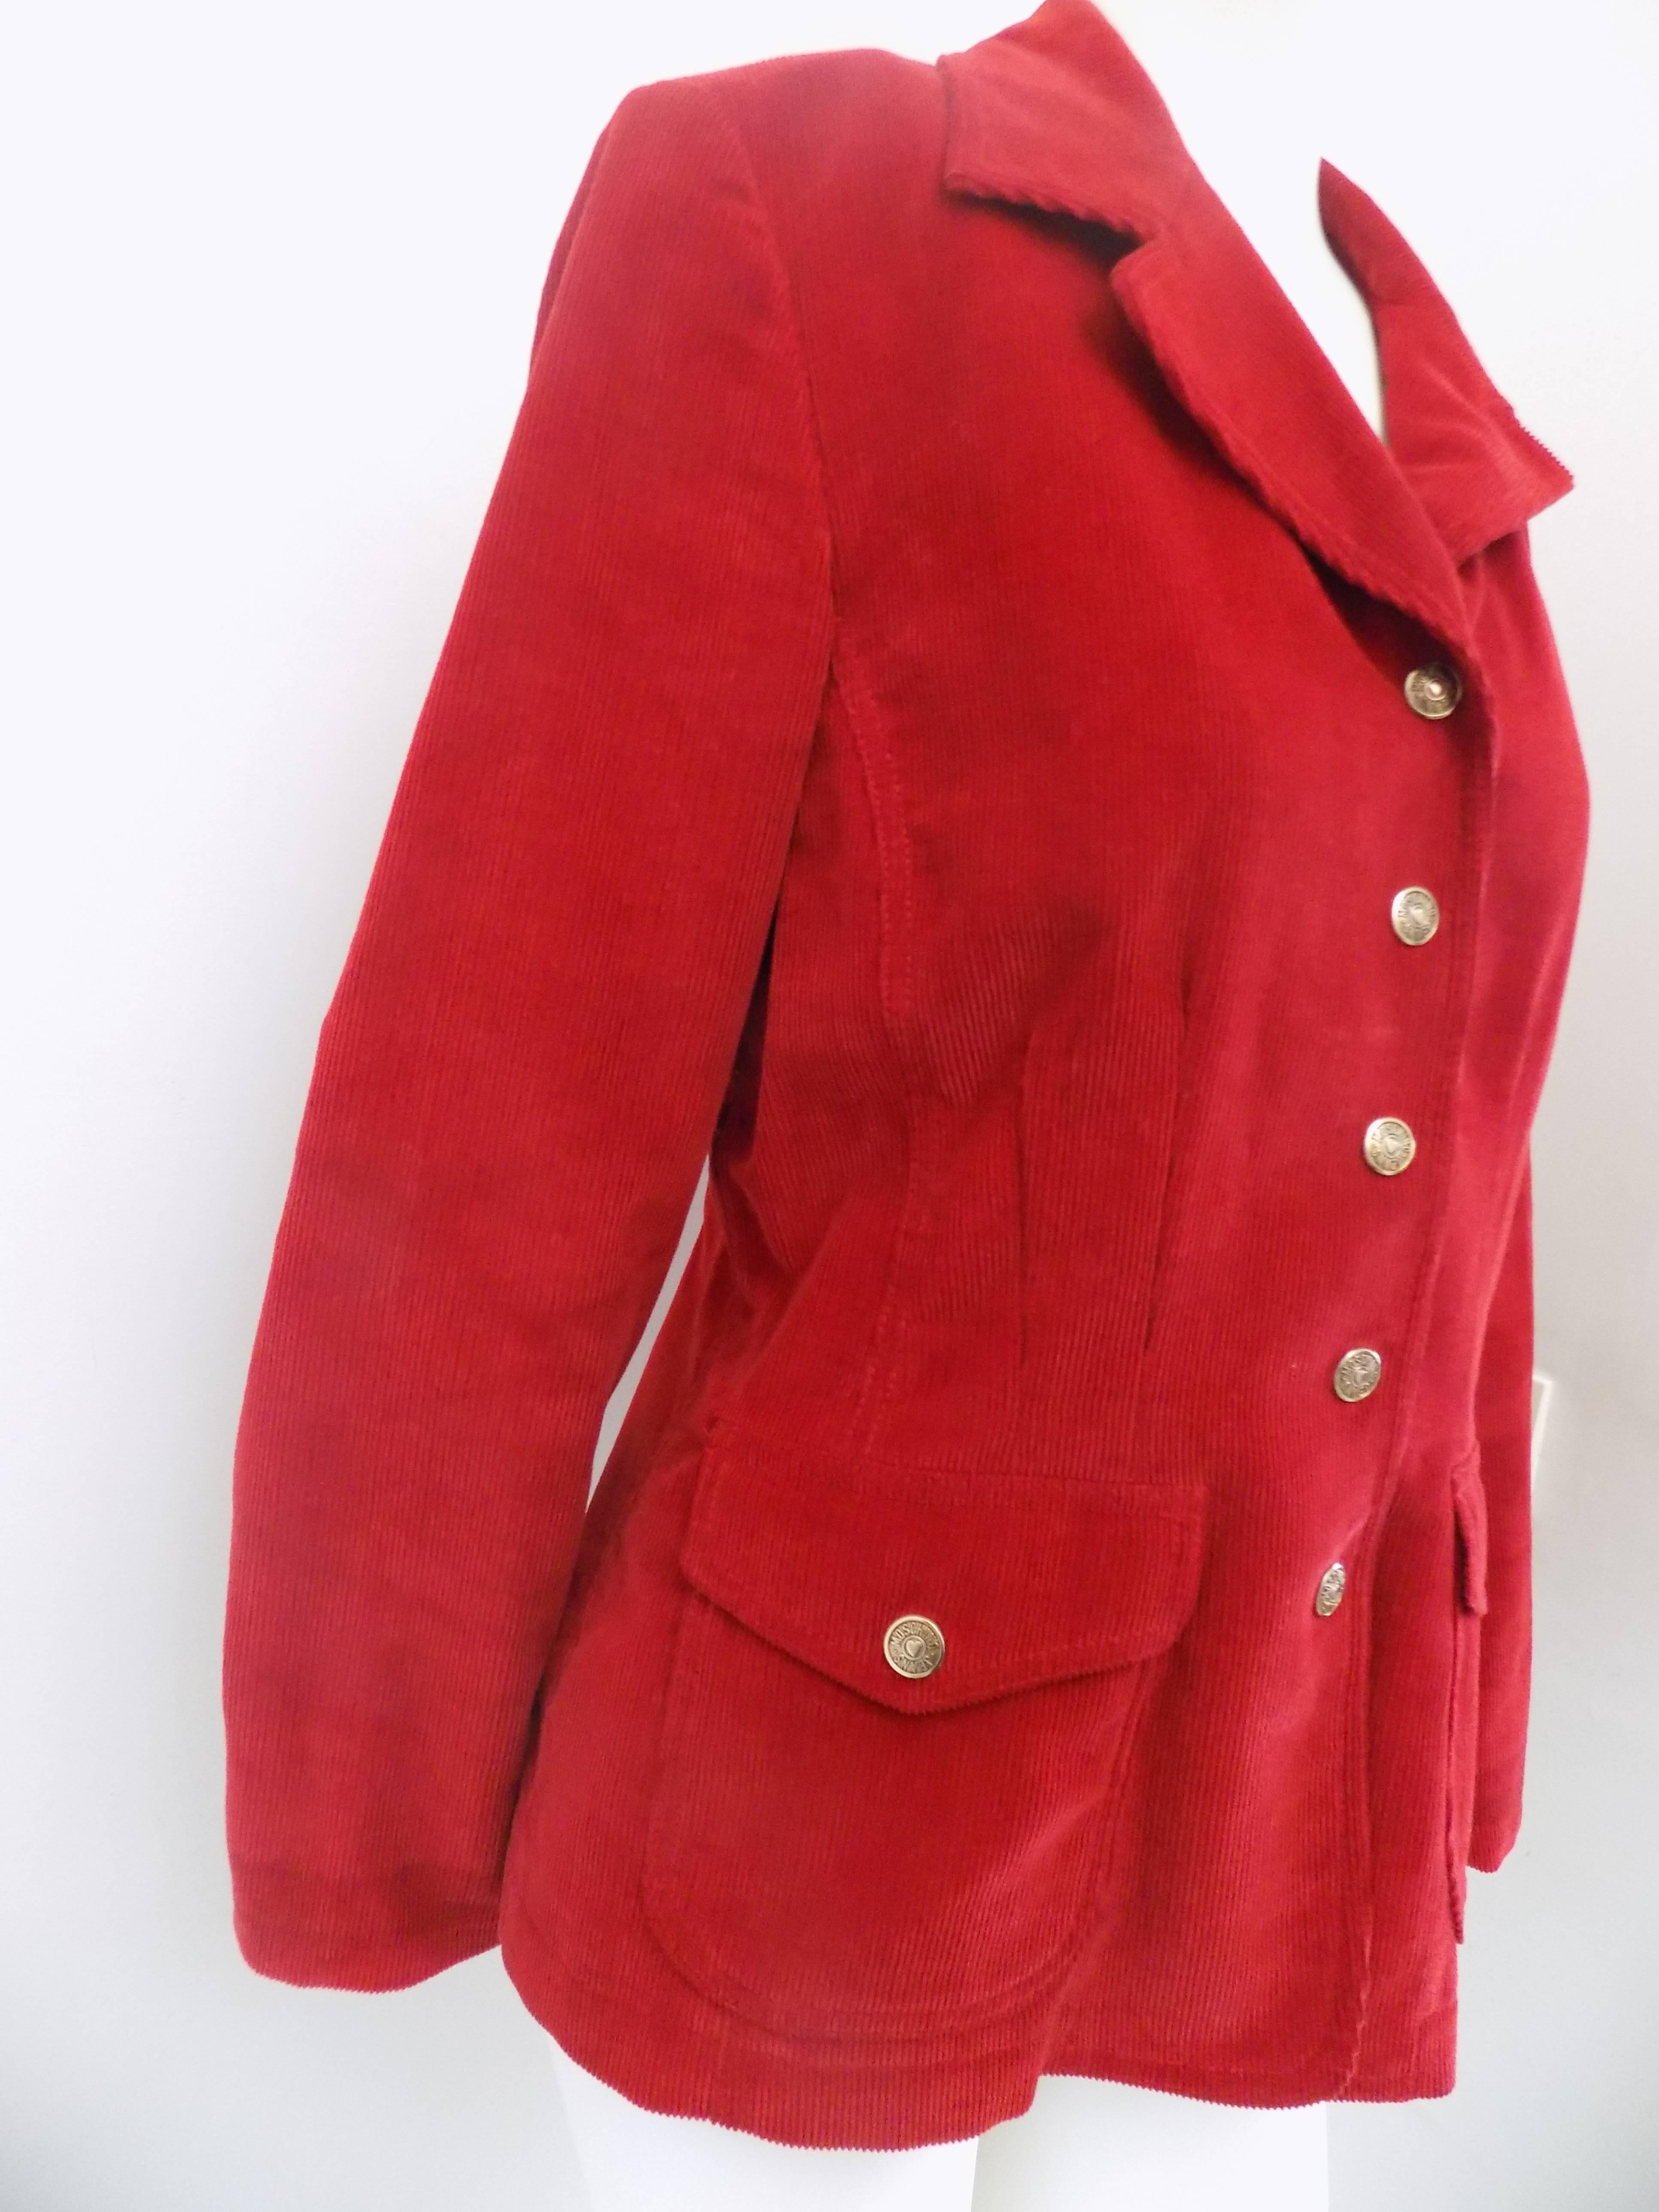 Moschino  red jacket totally made in italy in italian size range 46
100% cotton